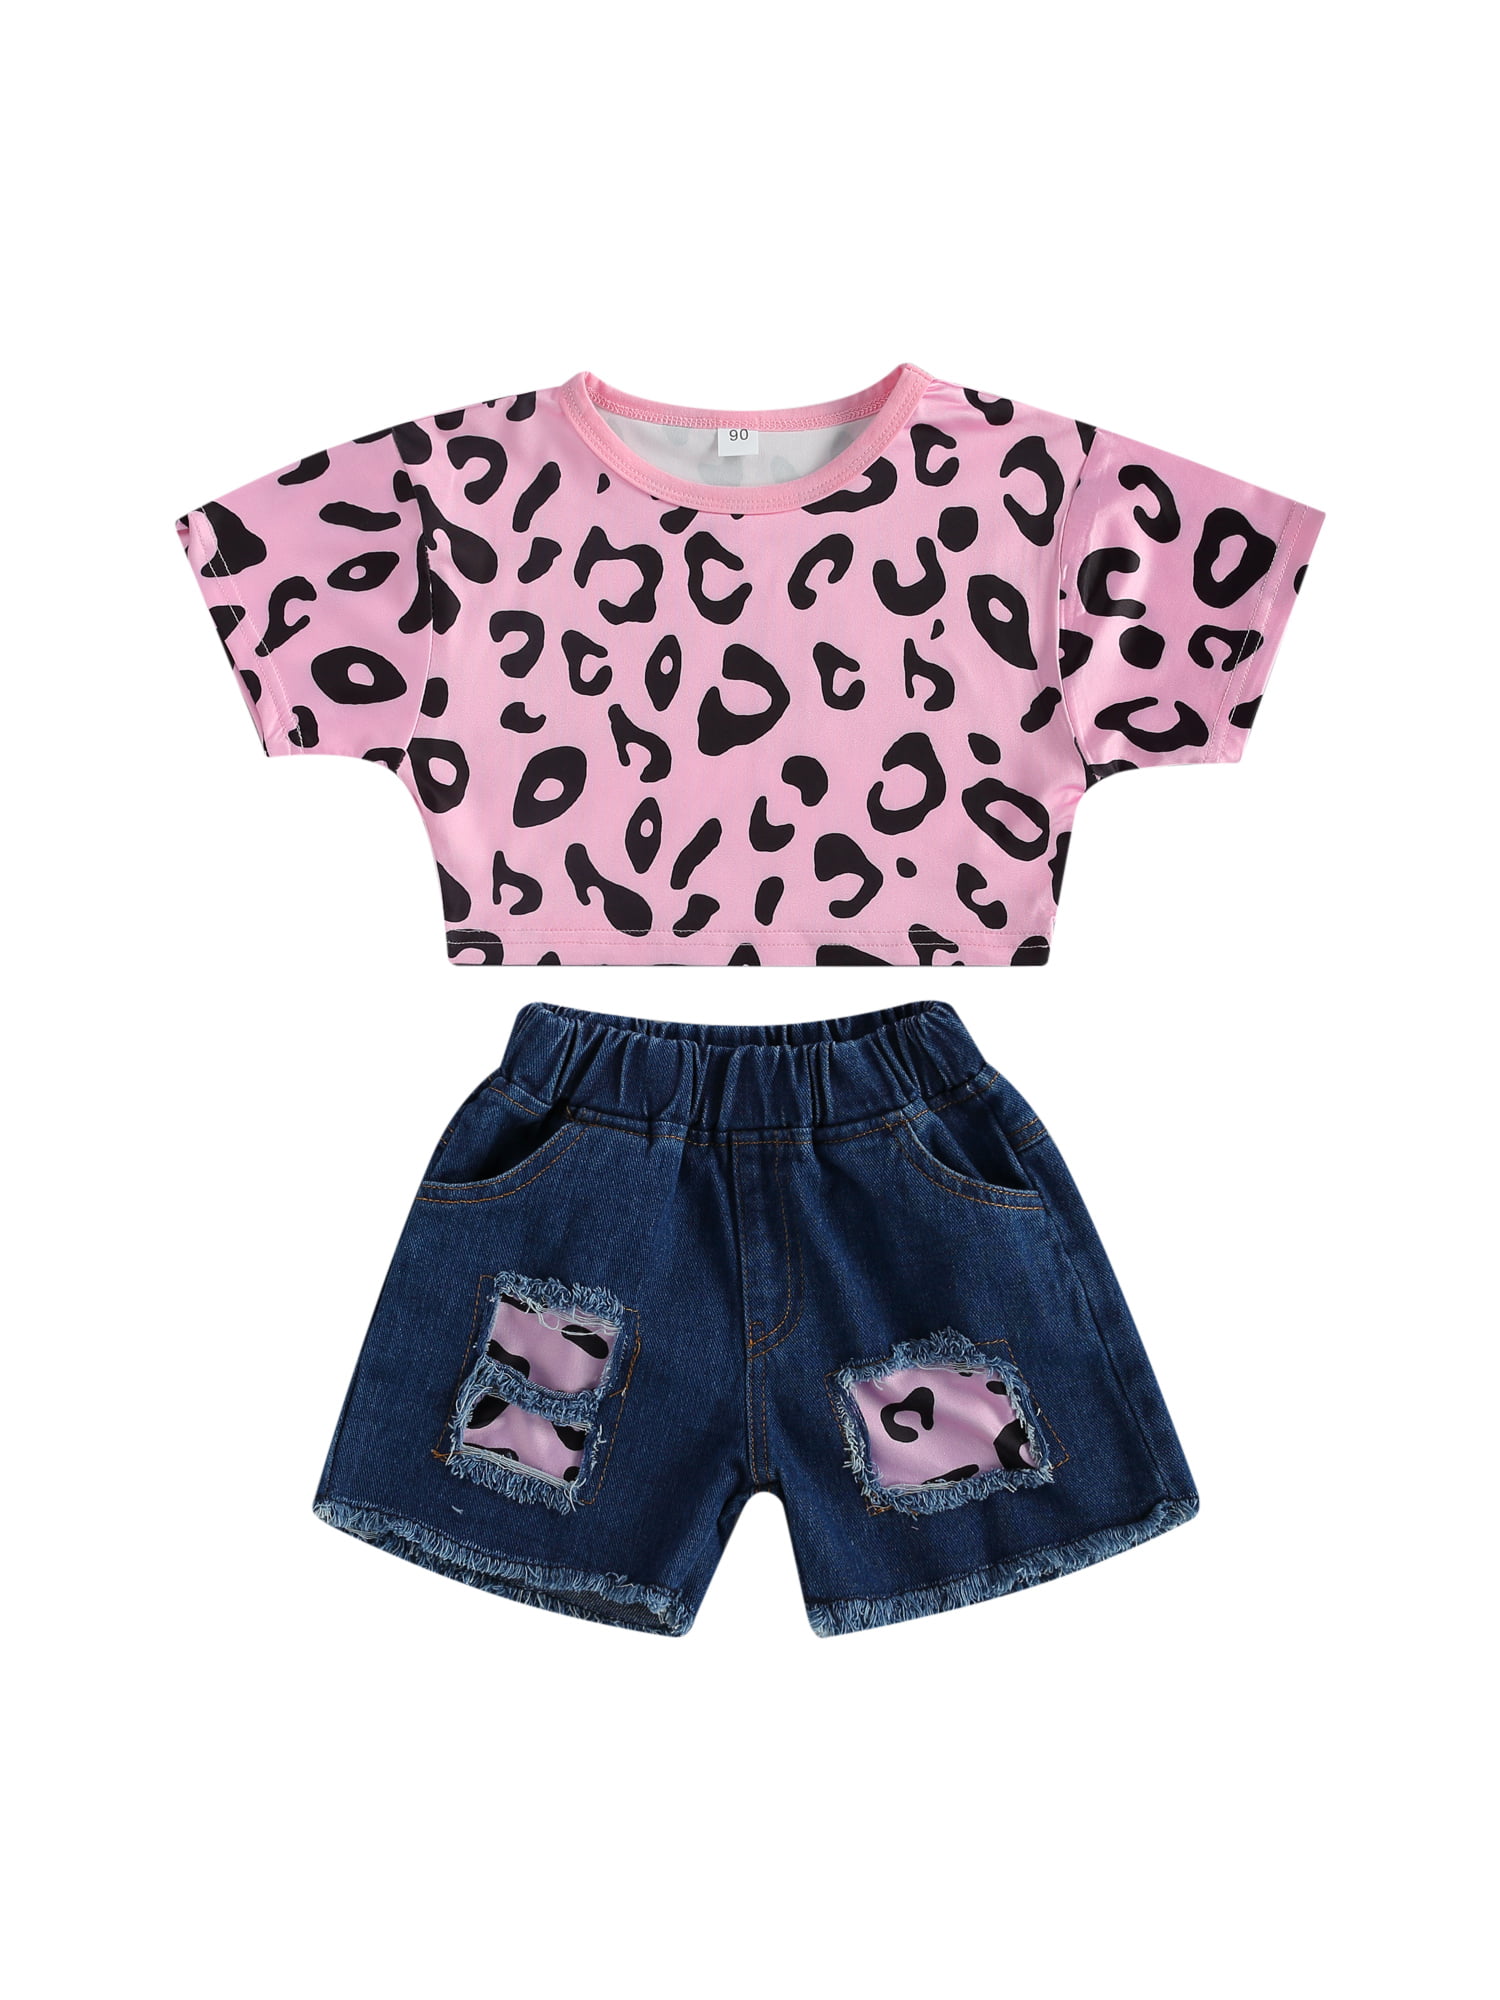 2Pcs Toddler Infant baby Girls Outfits Minnie T shirt Tops Shorts Sets Clothes 